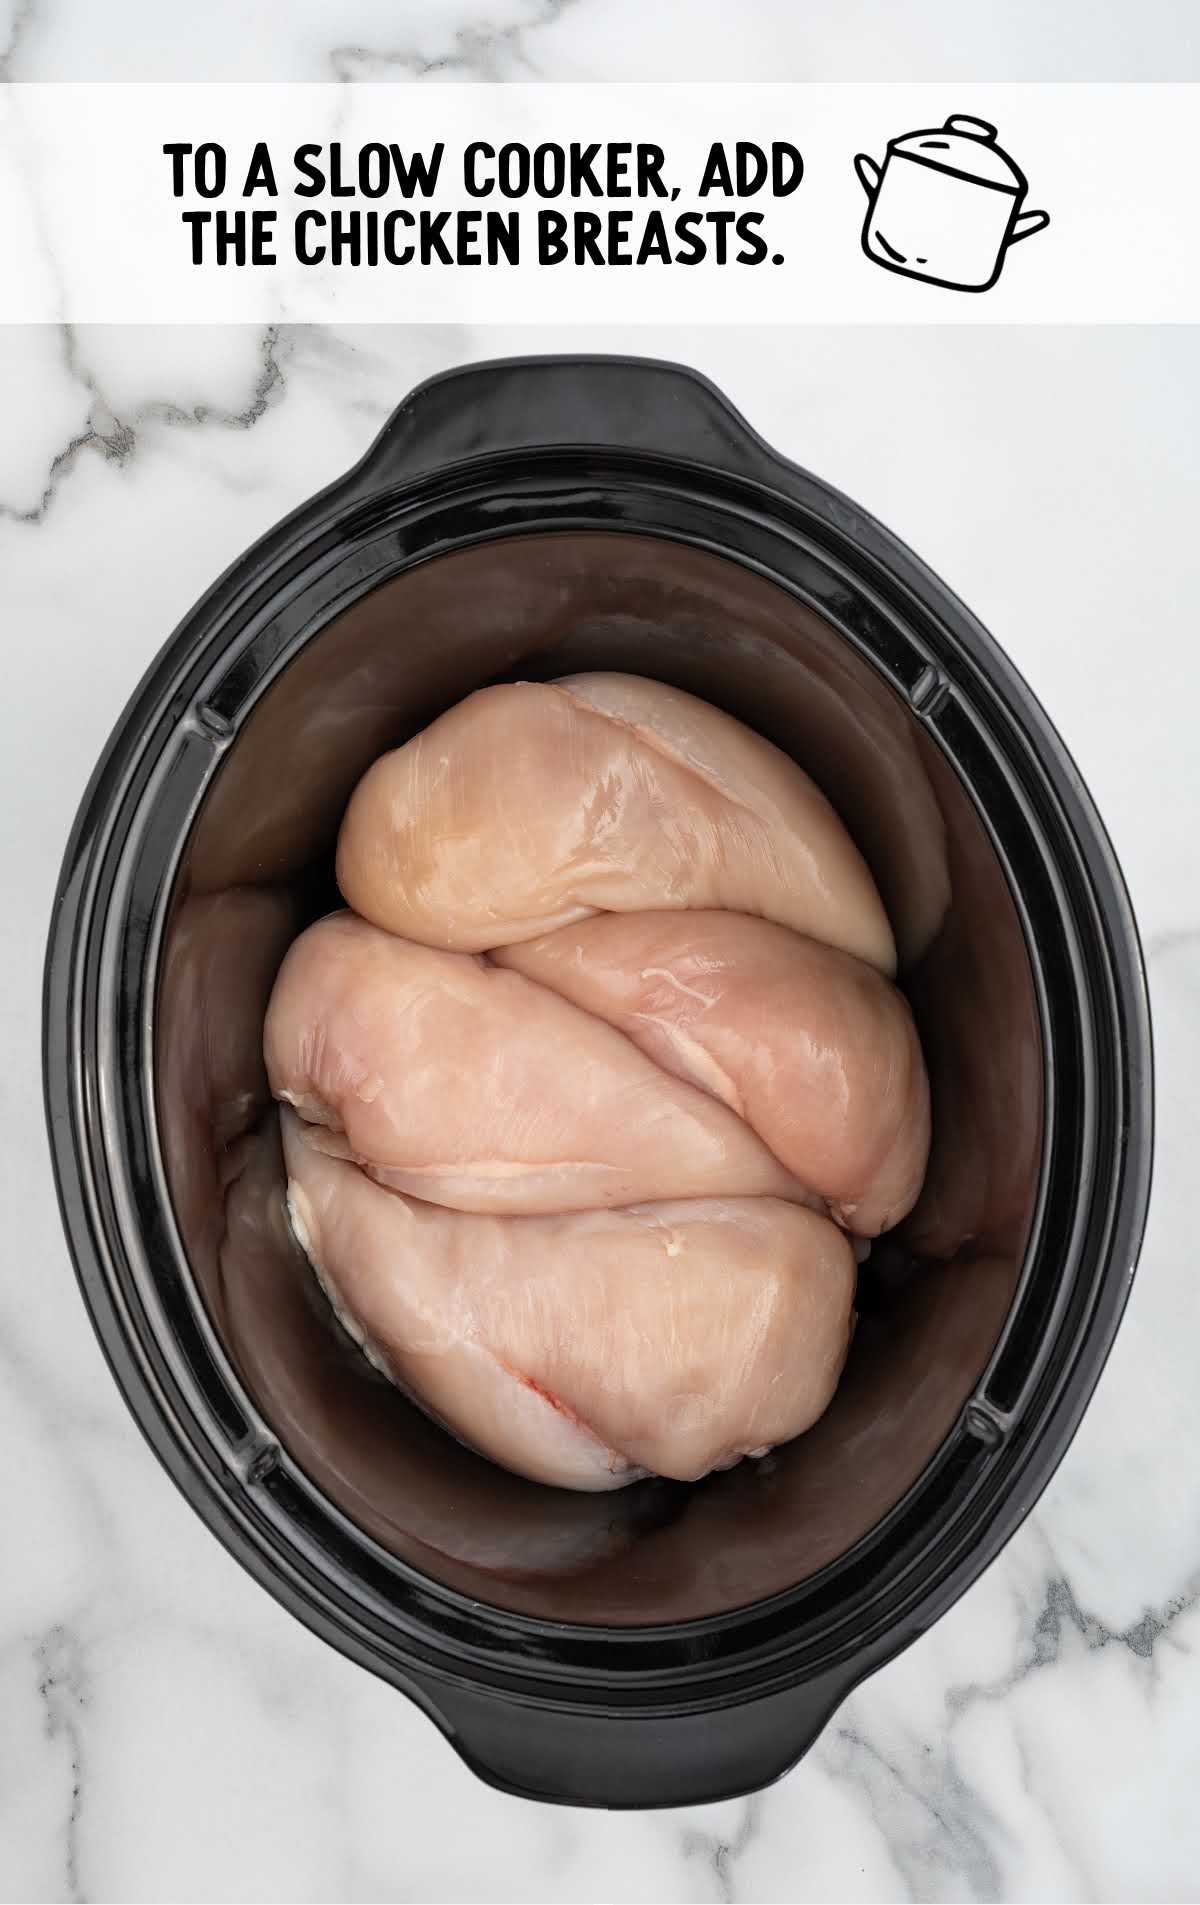 boneless skinless chicken breasts added to the crockpot 